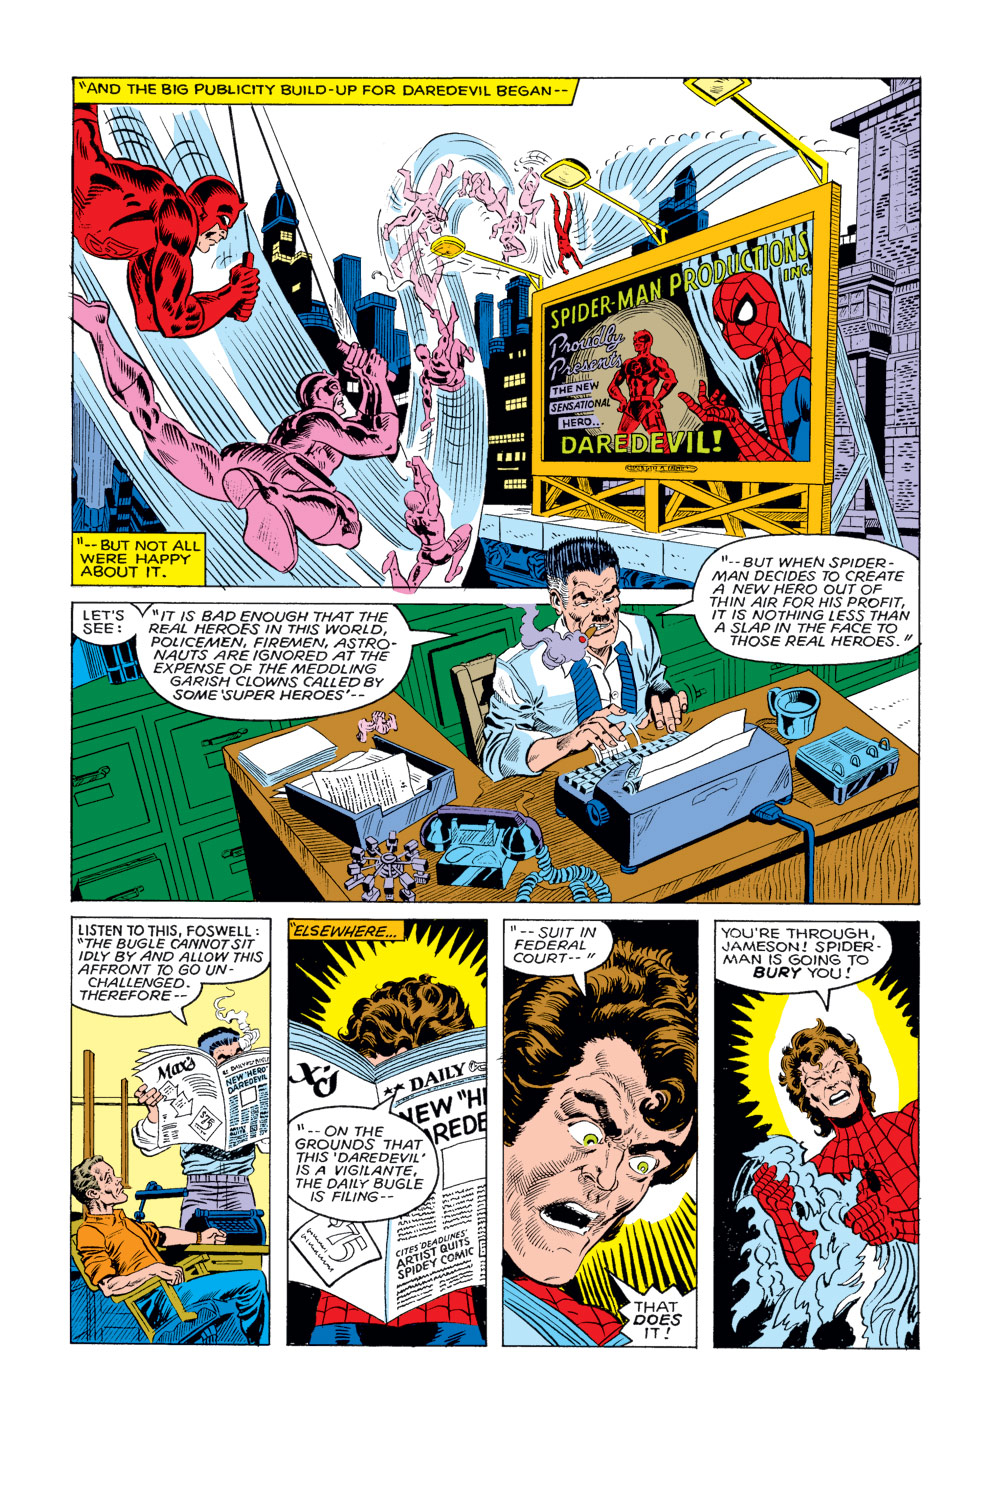 What If? (1977) issue 19 - Spider-Man had never become a crimefighter - Page 19